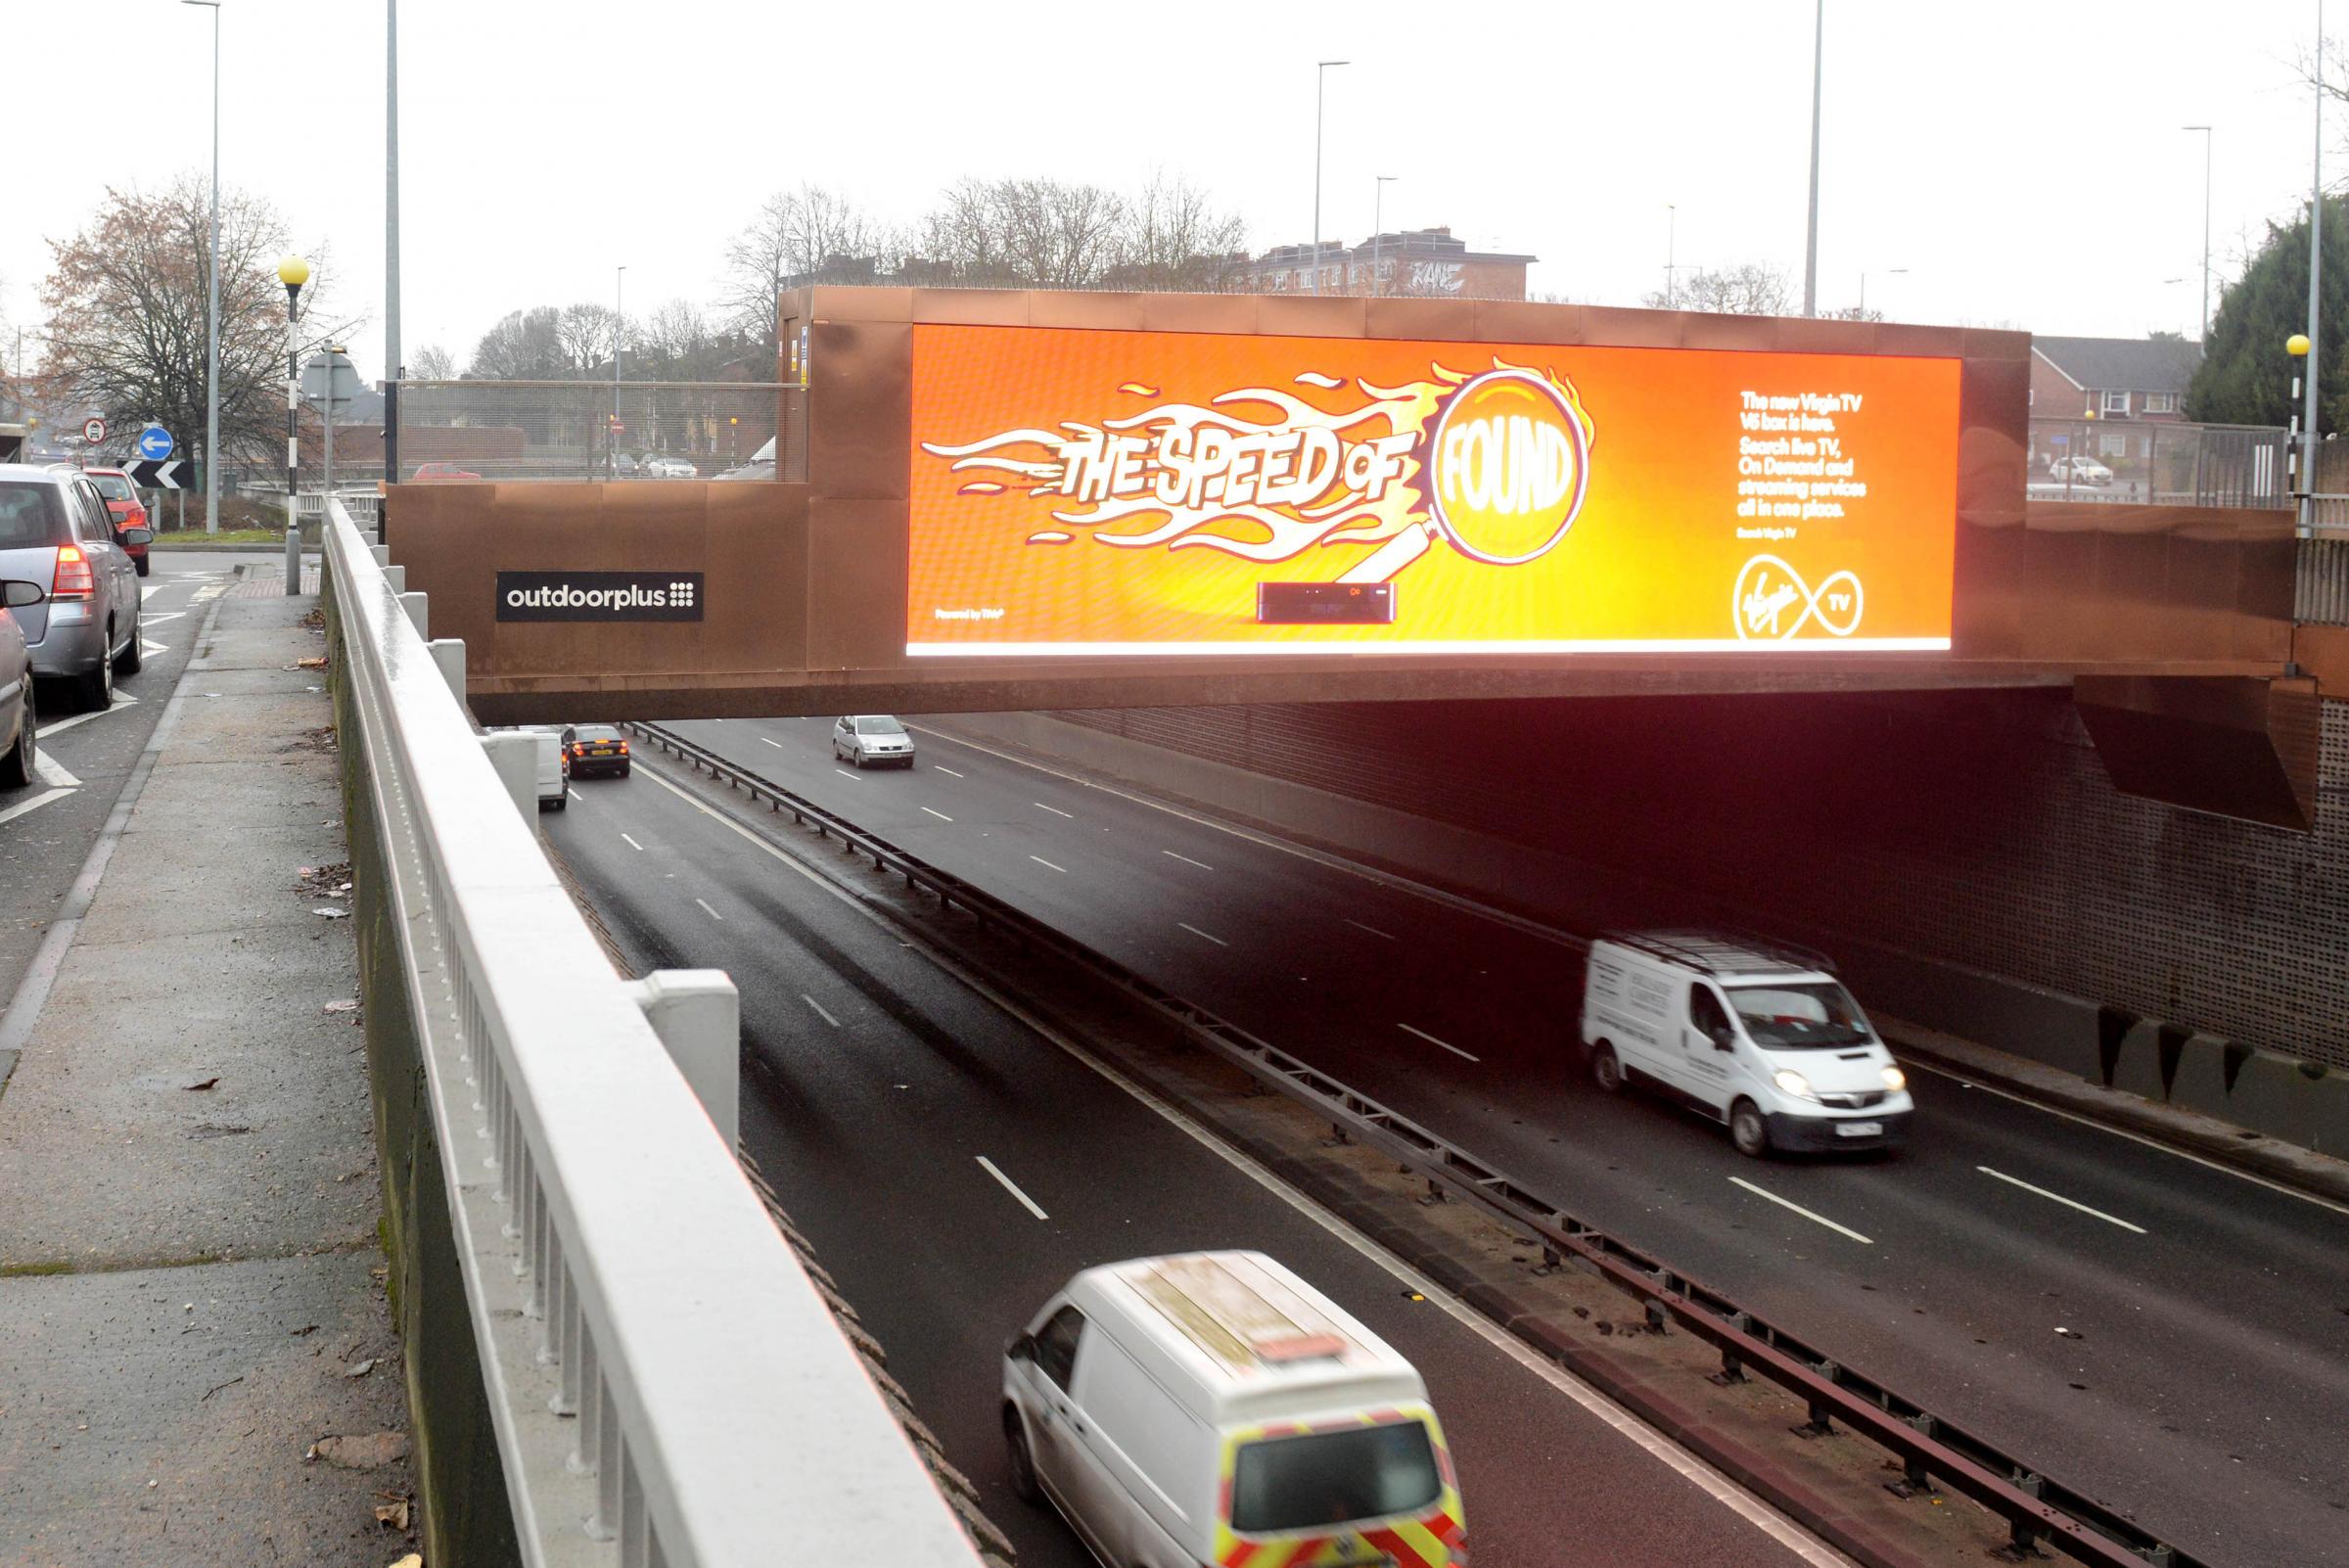 Incensed motorist slams New Malden's 'Las Vegas all-singing, all-dancing' billboard over the A3 for 'distracting' drivers